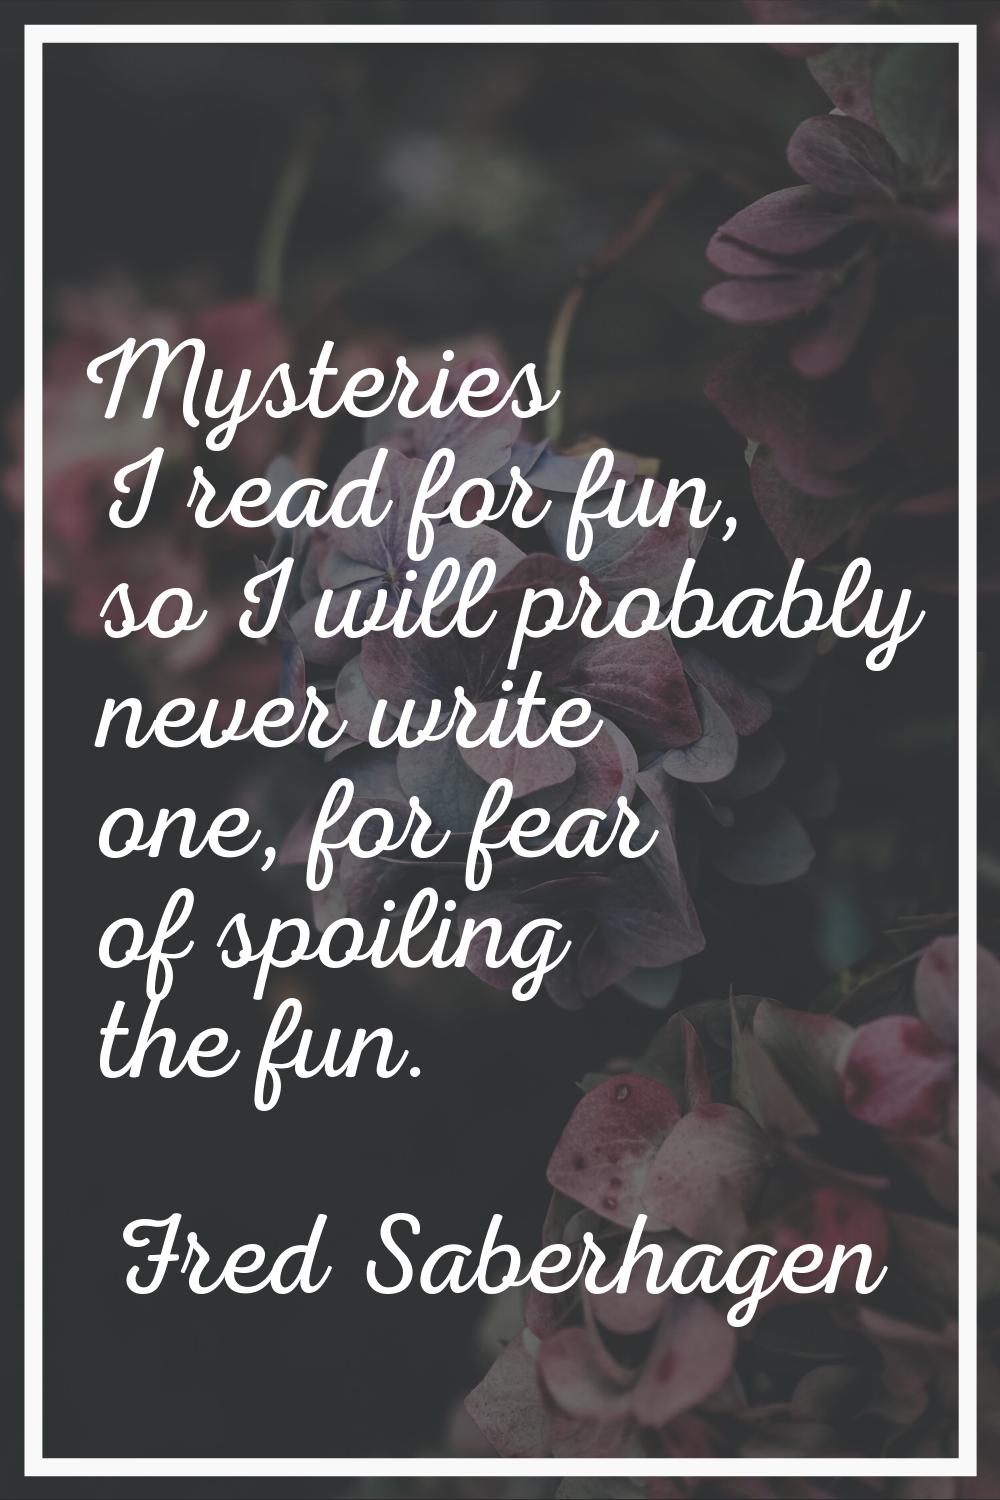 Mysteries I read for fun, so I will probably never write one, for fear of spoiling the fun.